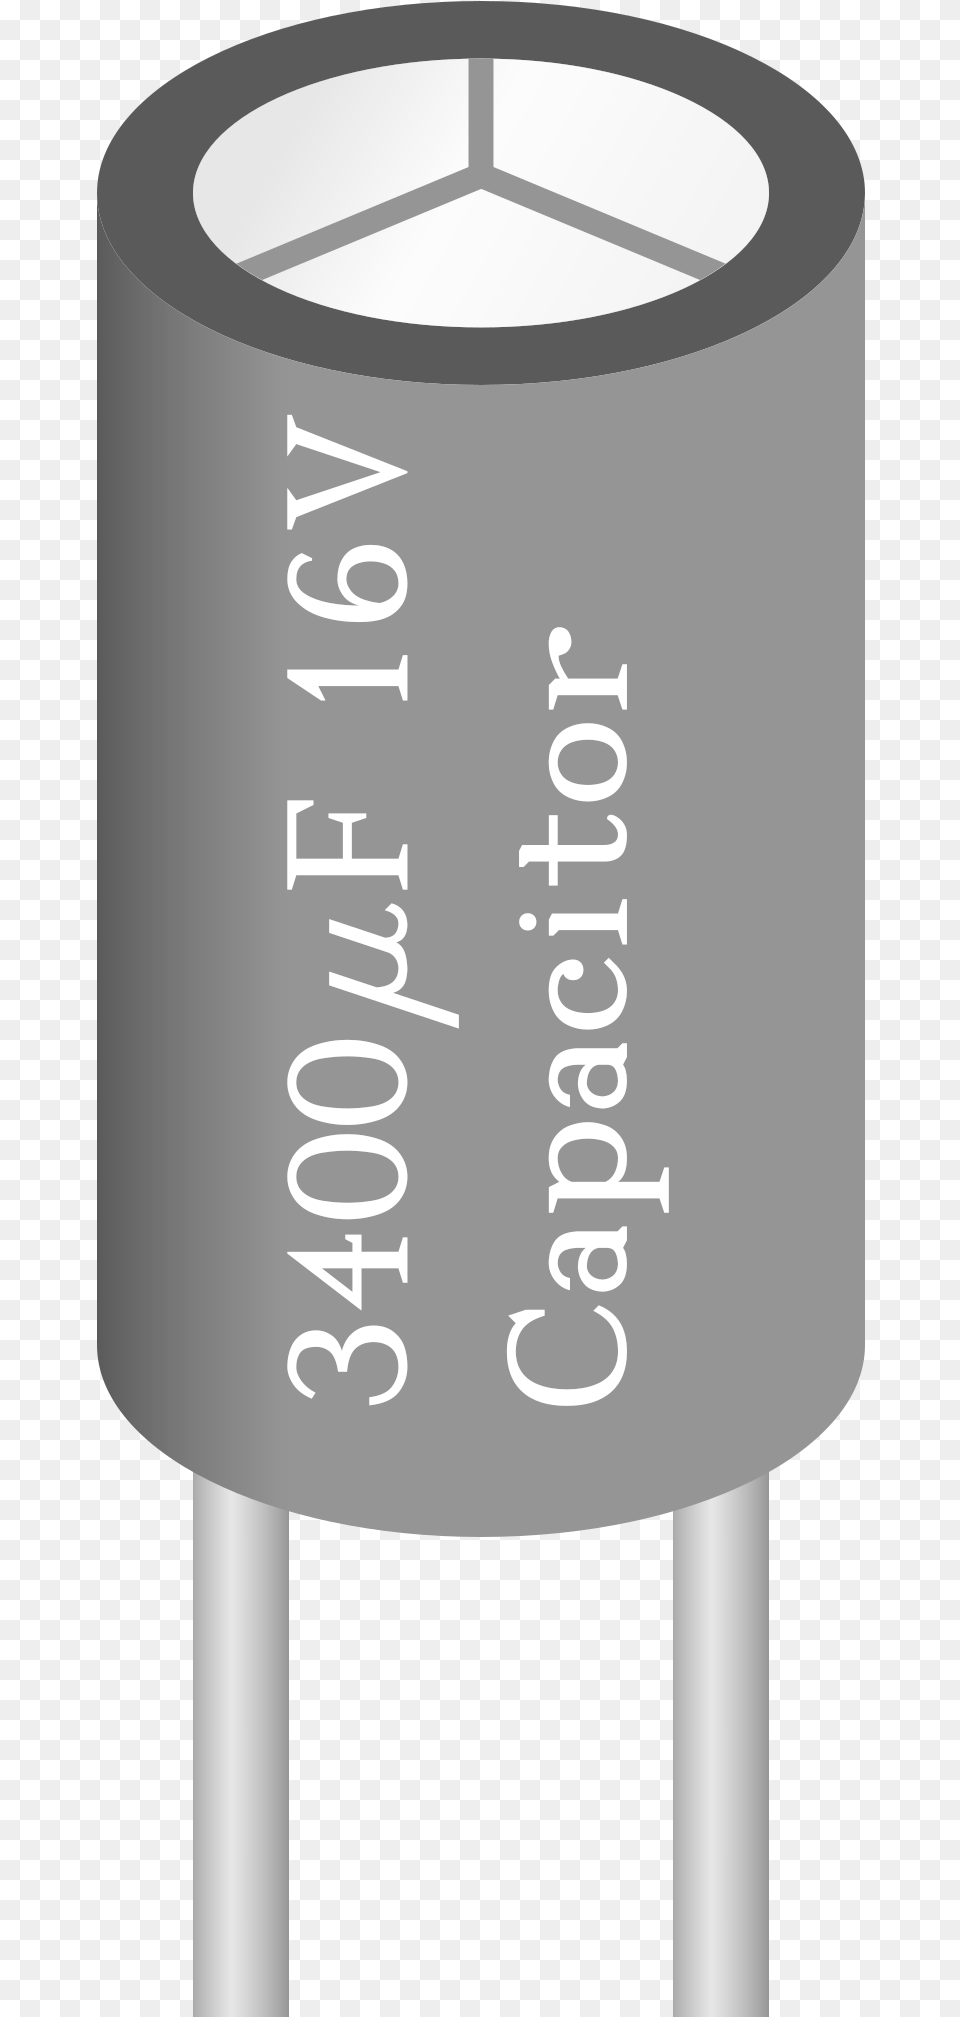 This Icons Design Of Aluminum Electrolytic, Cylinder Free Png Download